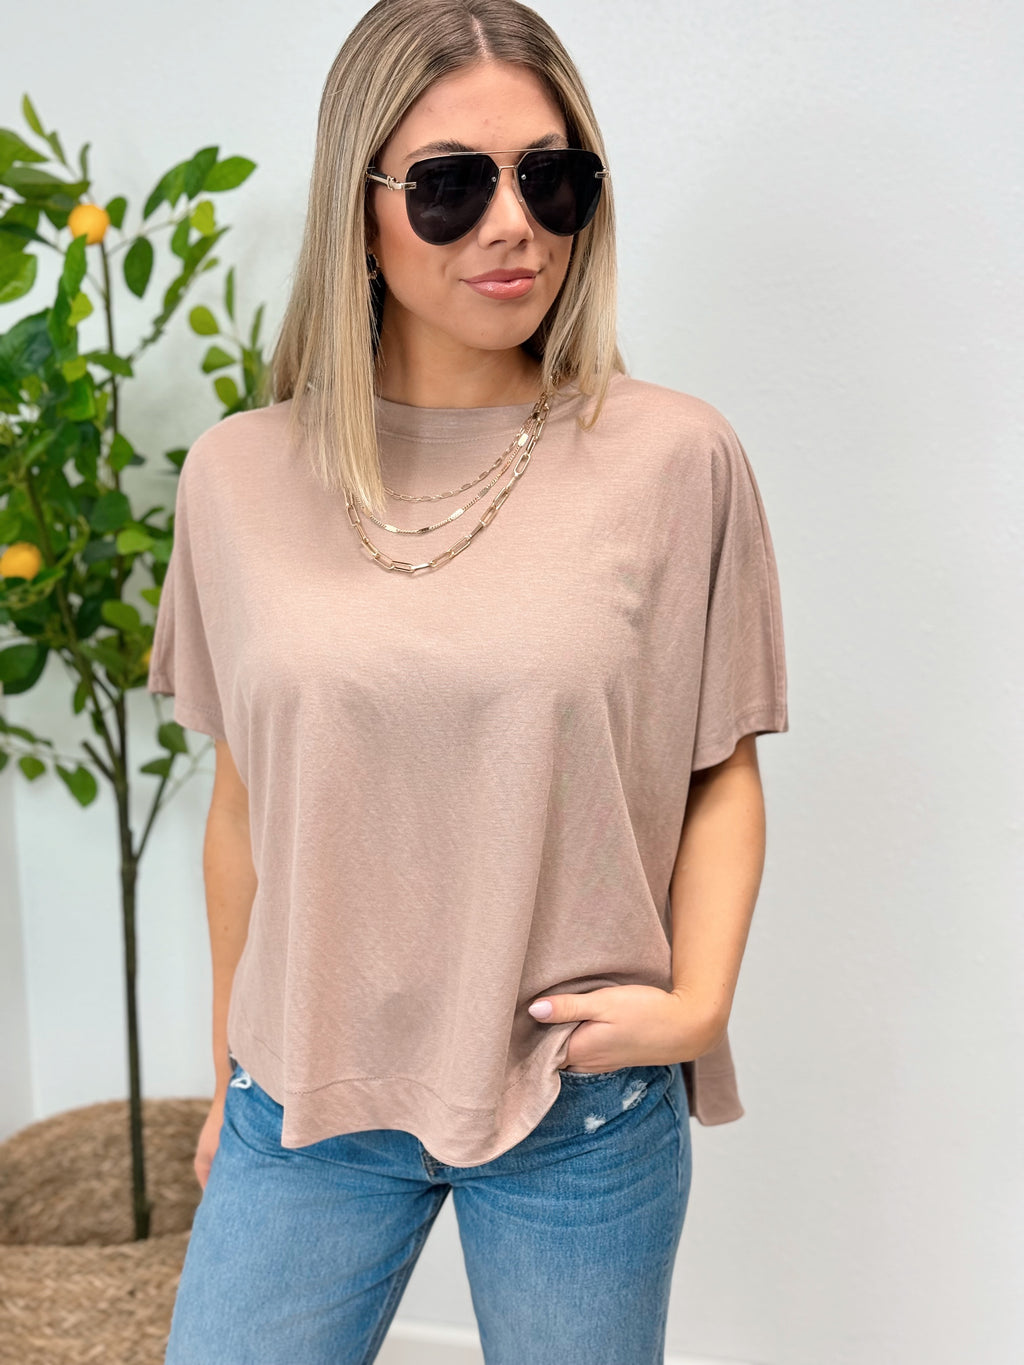 All Dressed Up Tee - 2 Colors